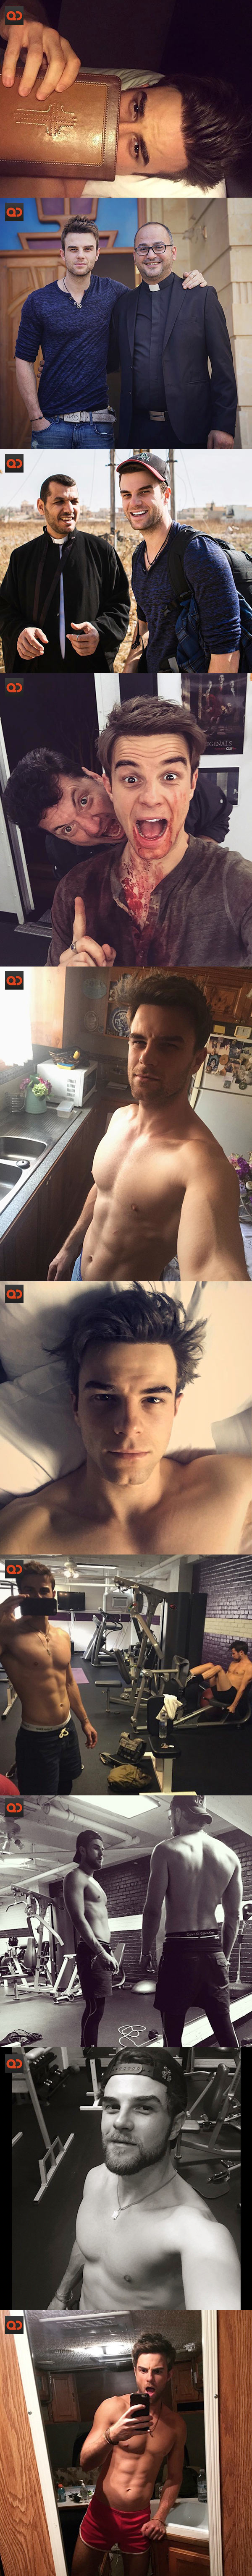 Nathaniel Buzolic, Australian Actor From The CW Shows The Vampire Diaries And The Originals, Alleged Naked Photos Hit!